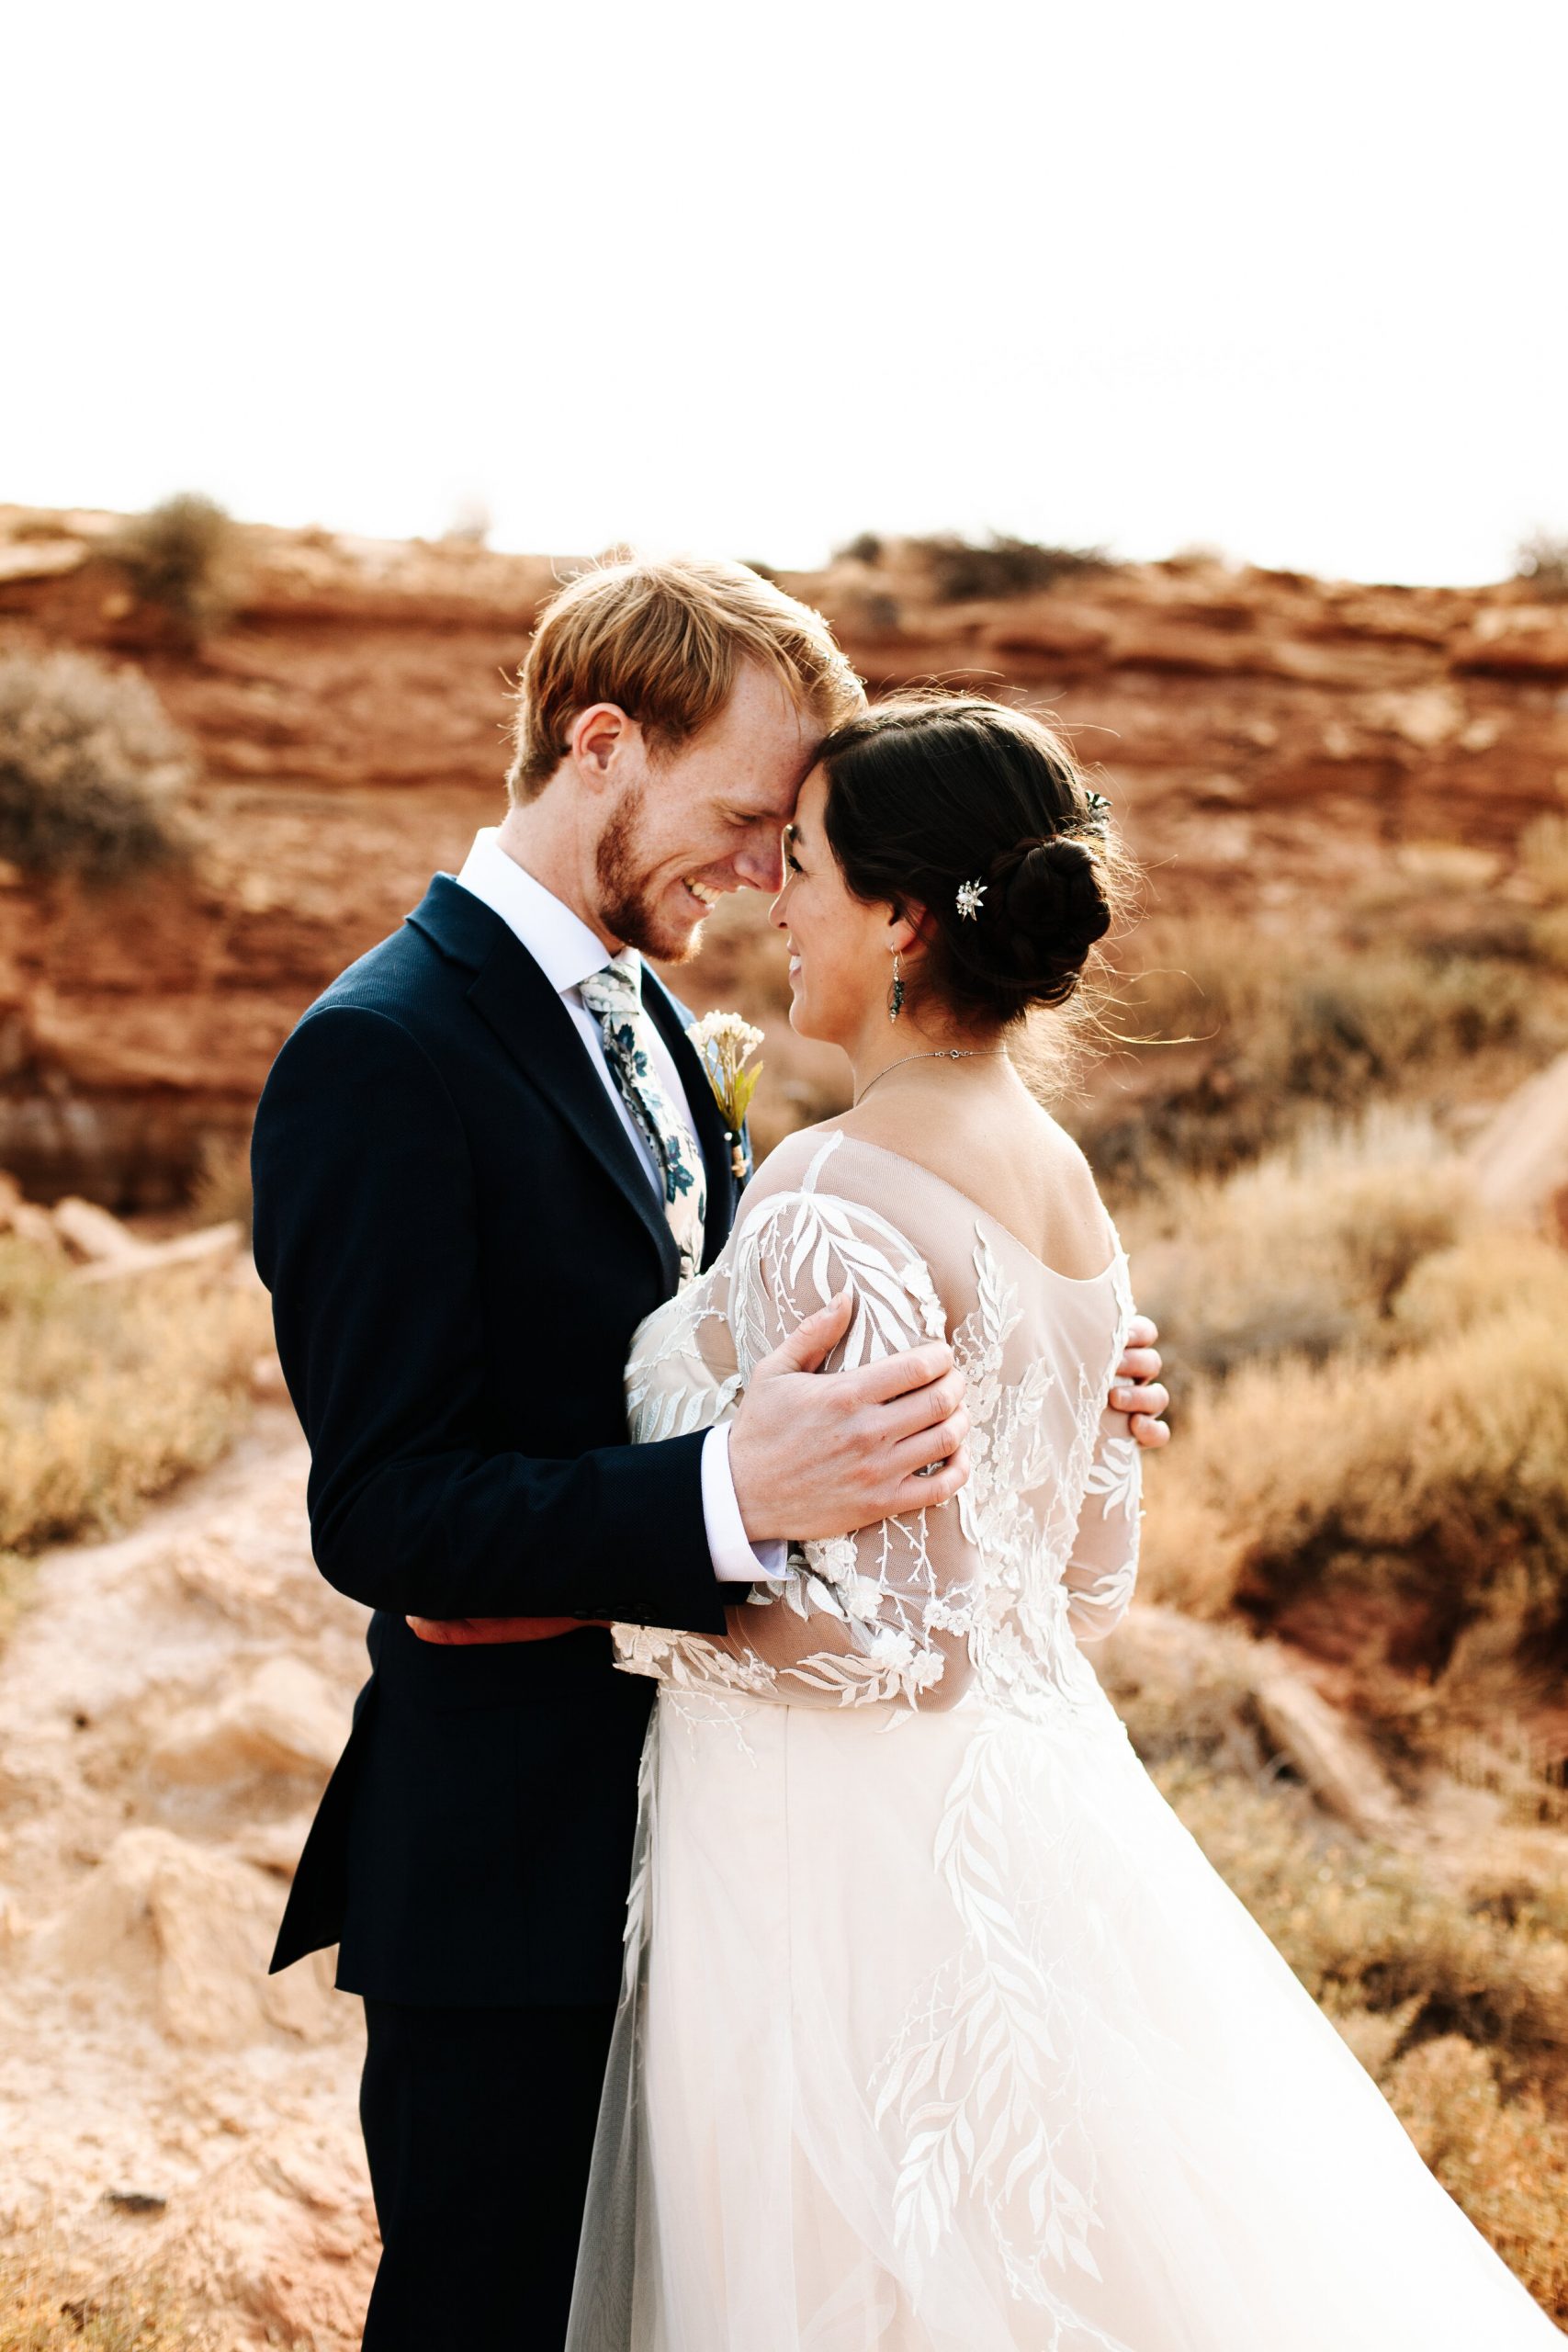 Couple looking at each other at their desert wedding in Moab, Utah.